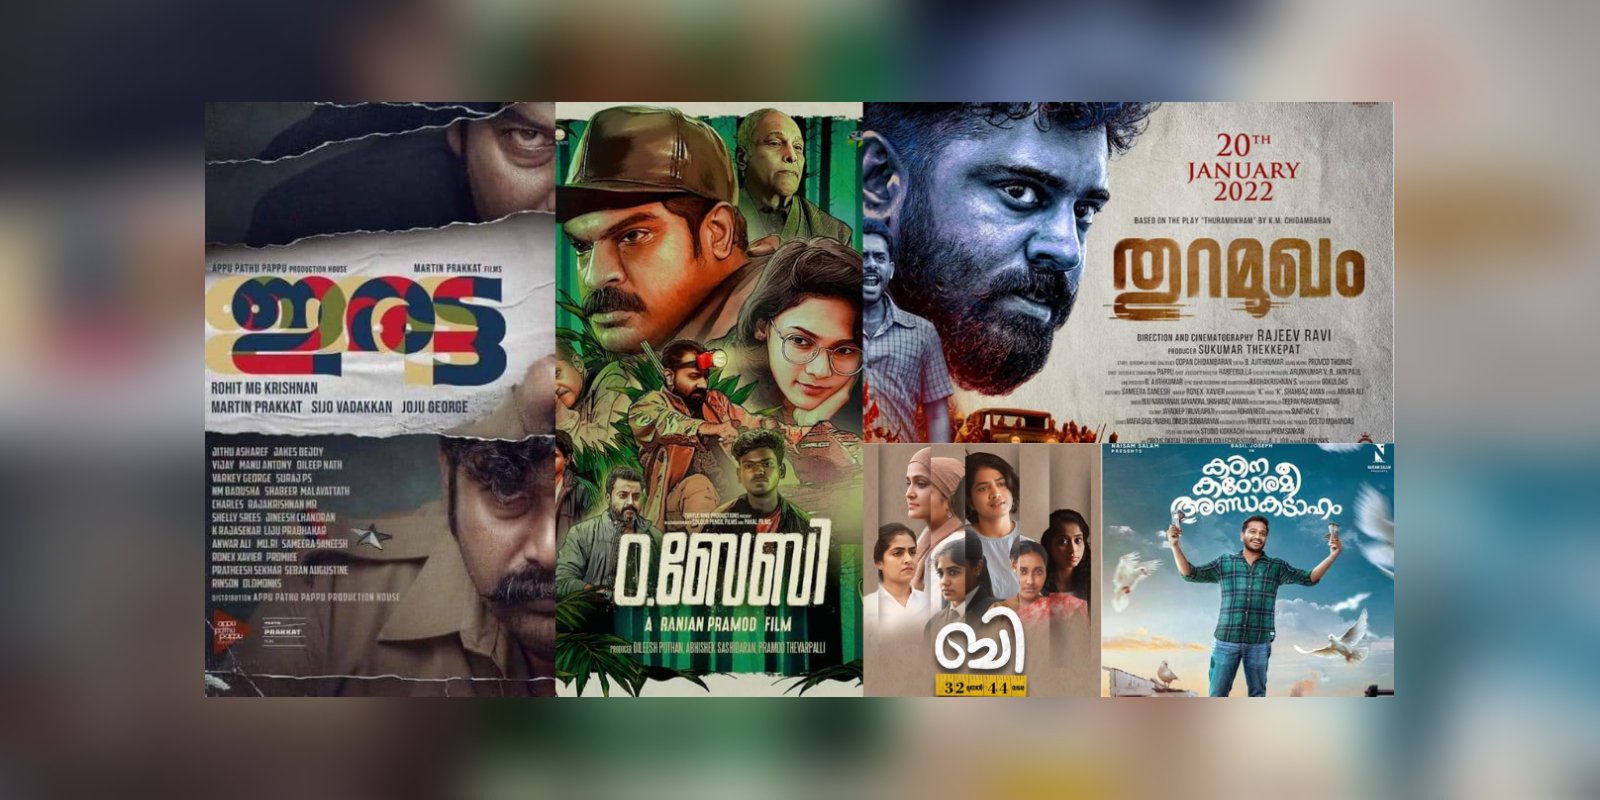 content-driven Malayalam films of the first half of 2023